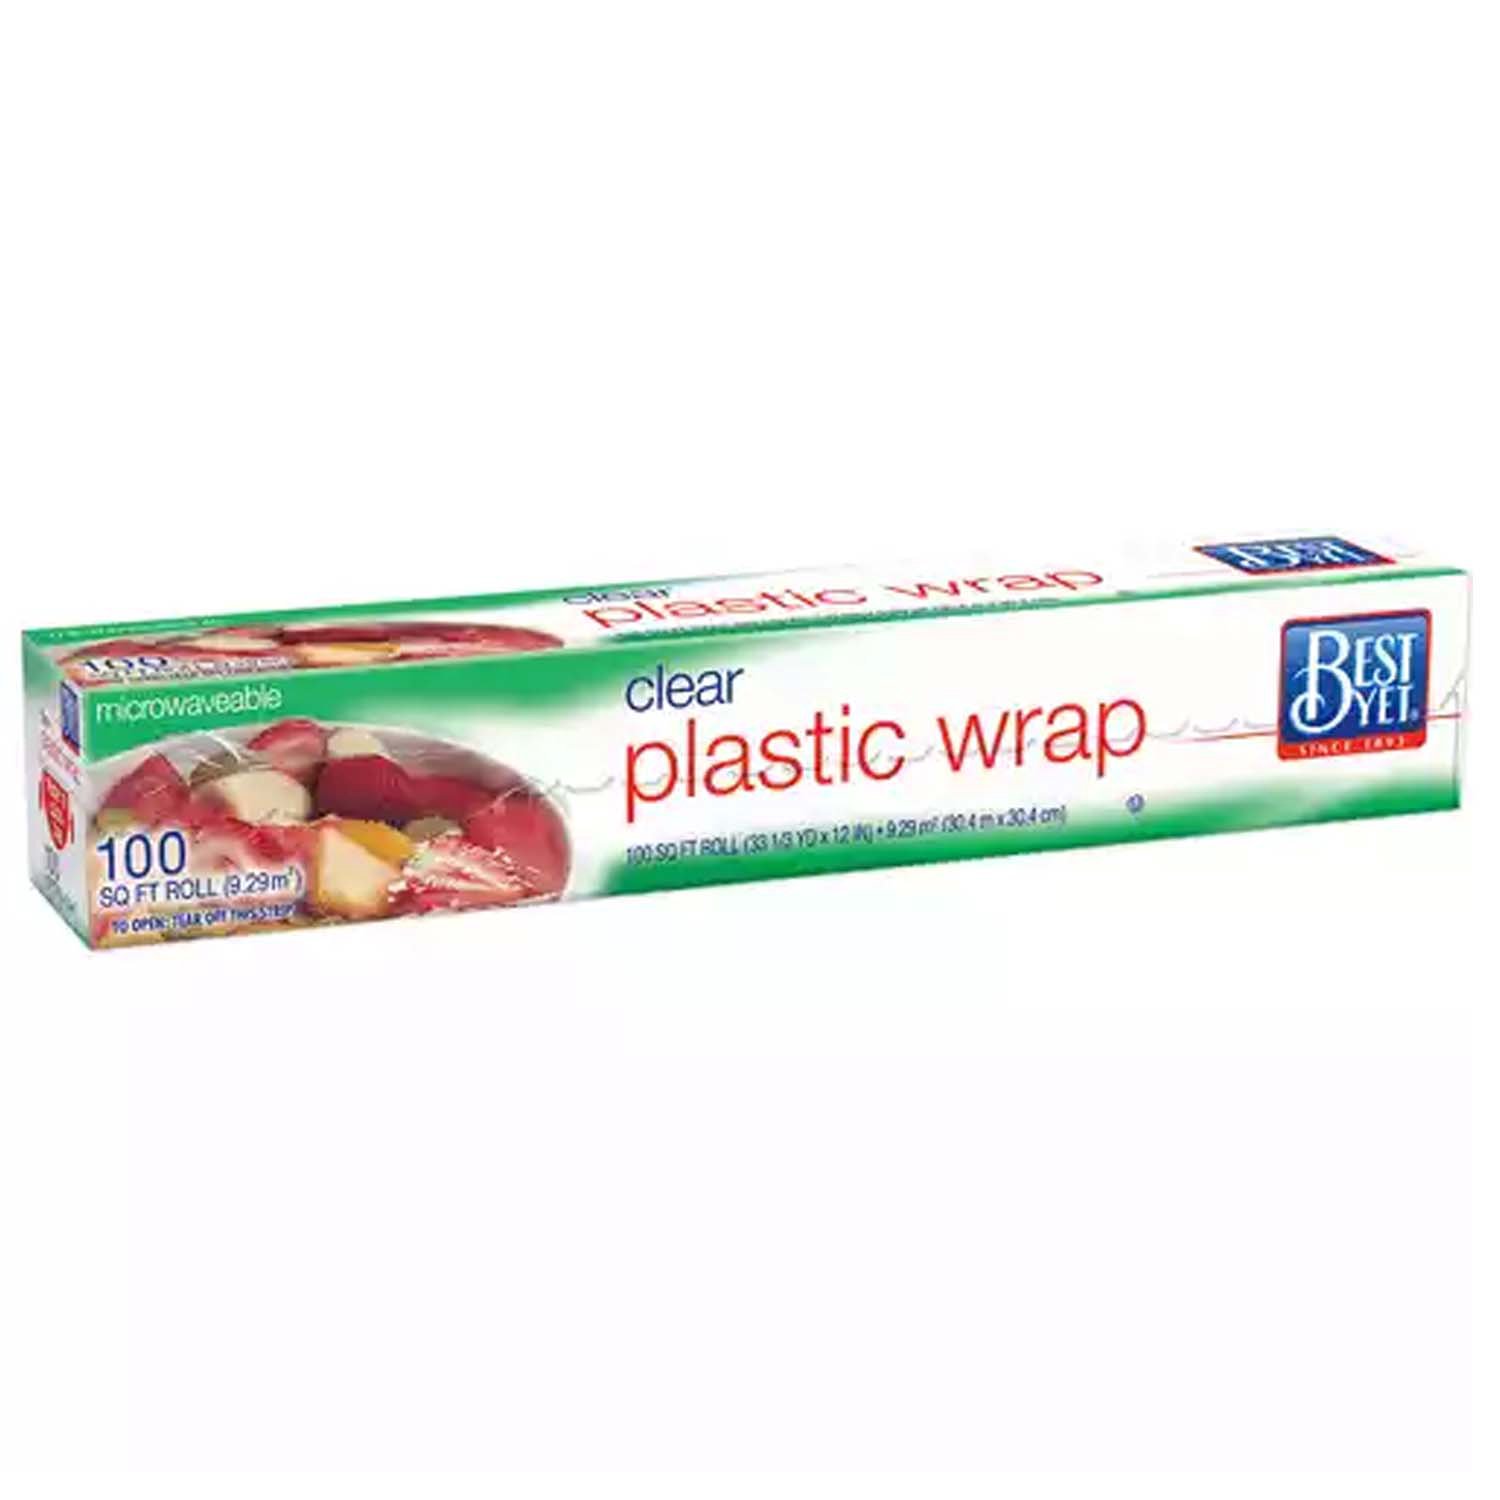 The only place I've seen the A.T.K. recommended plastic wrap on